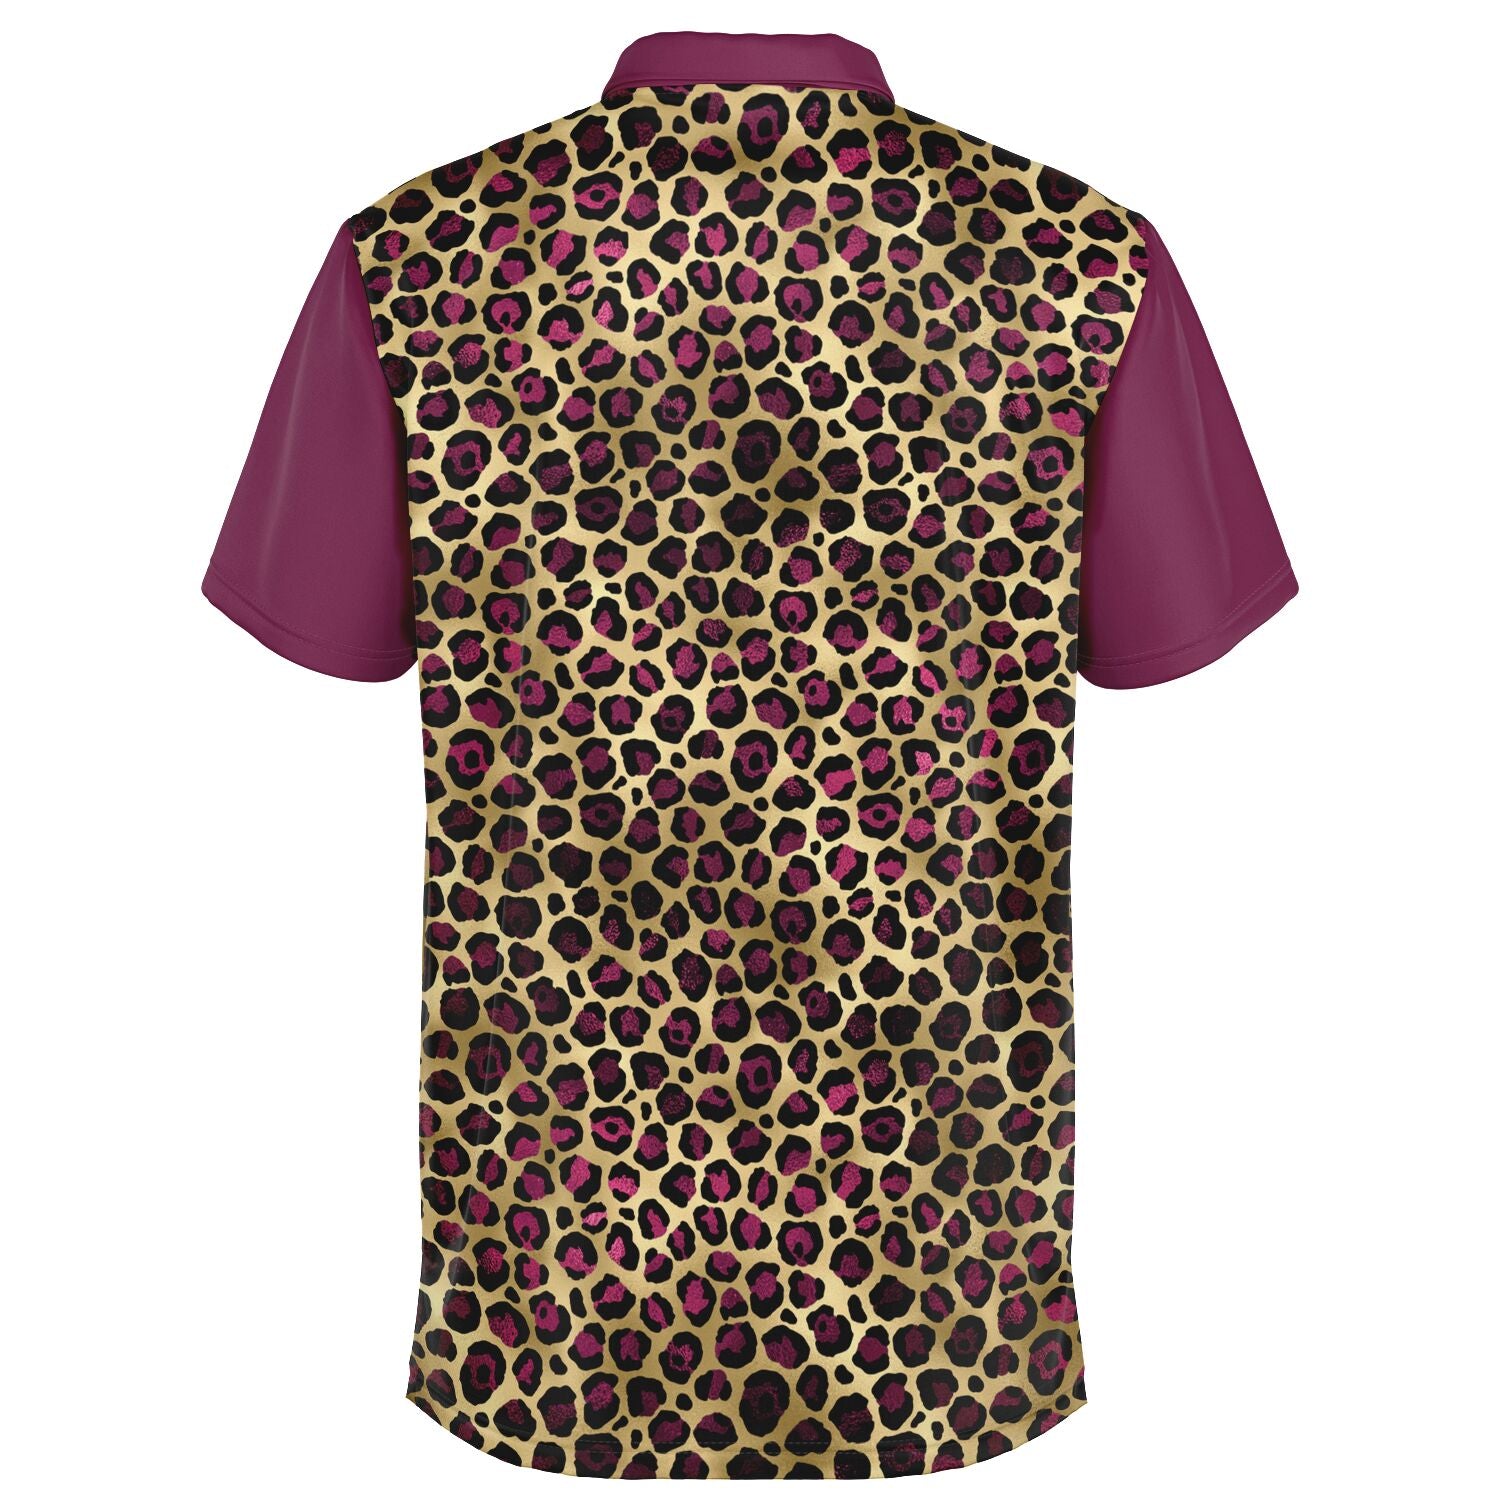 Ruby Leopard Printed Performance Golf Polo: Elegance Meets Functionality on the Fairway